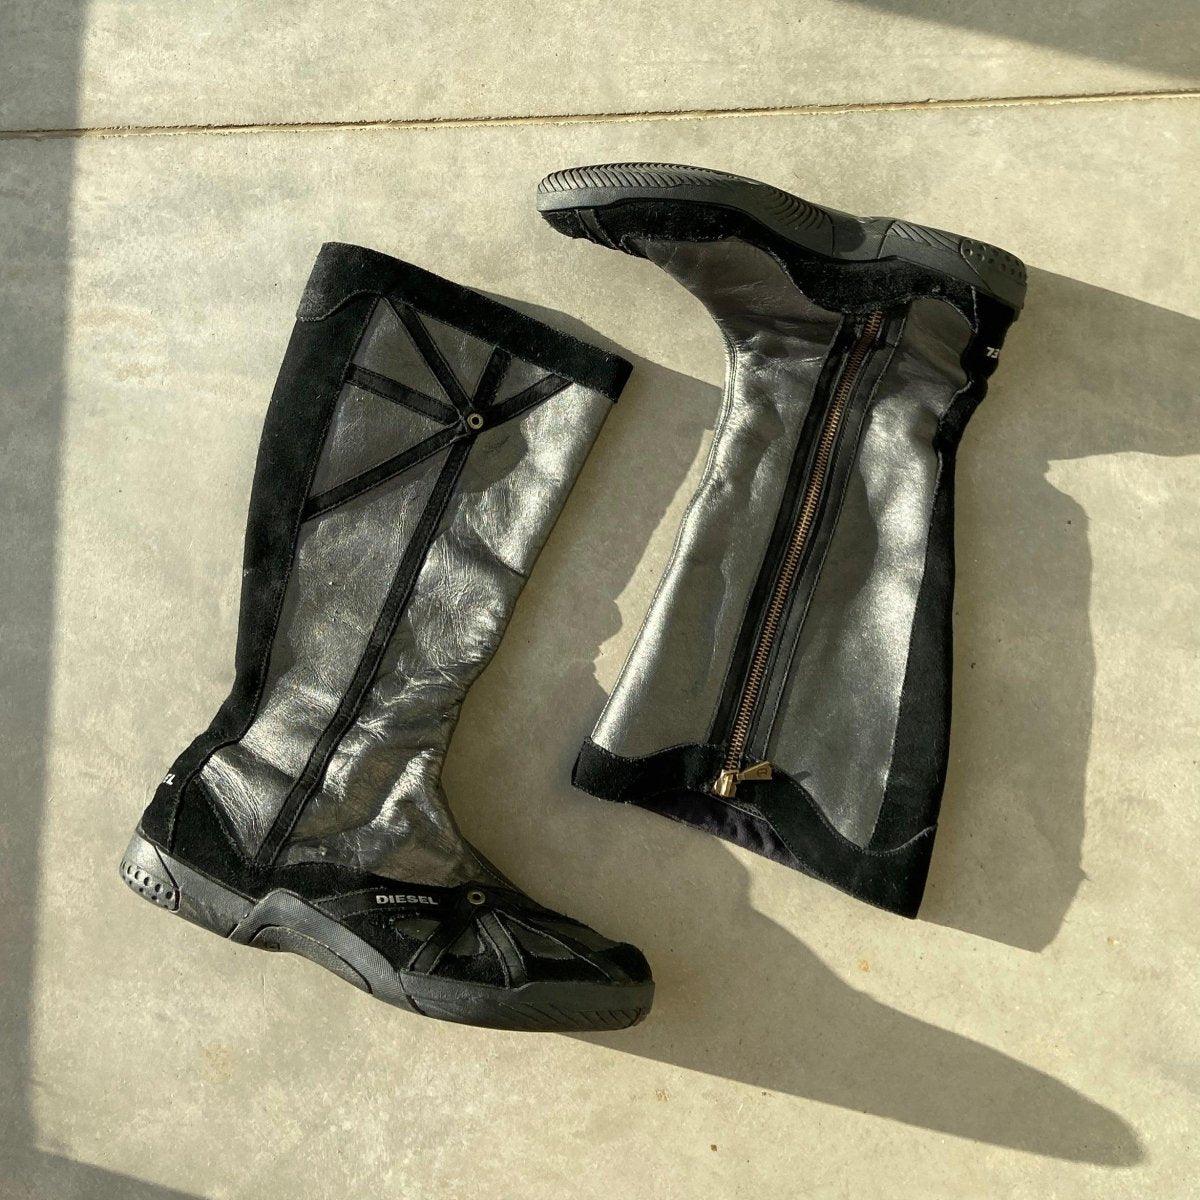 00'S DIESEL SILVER LEATHER BOOTS - EU 39 - Known Source